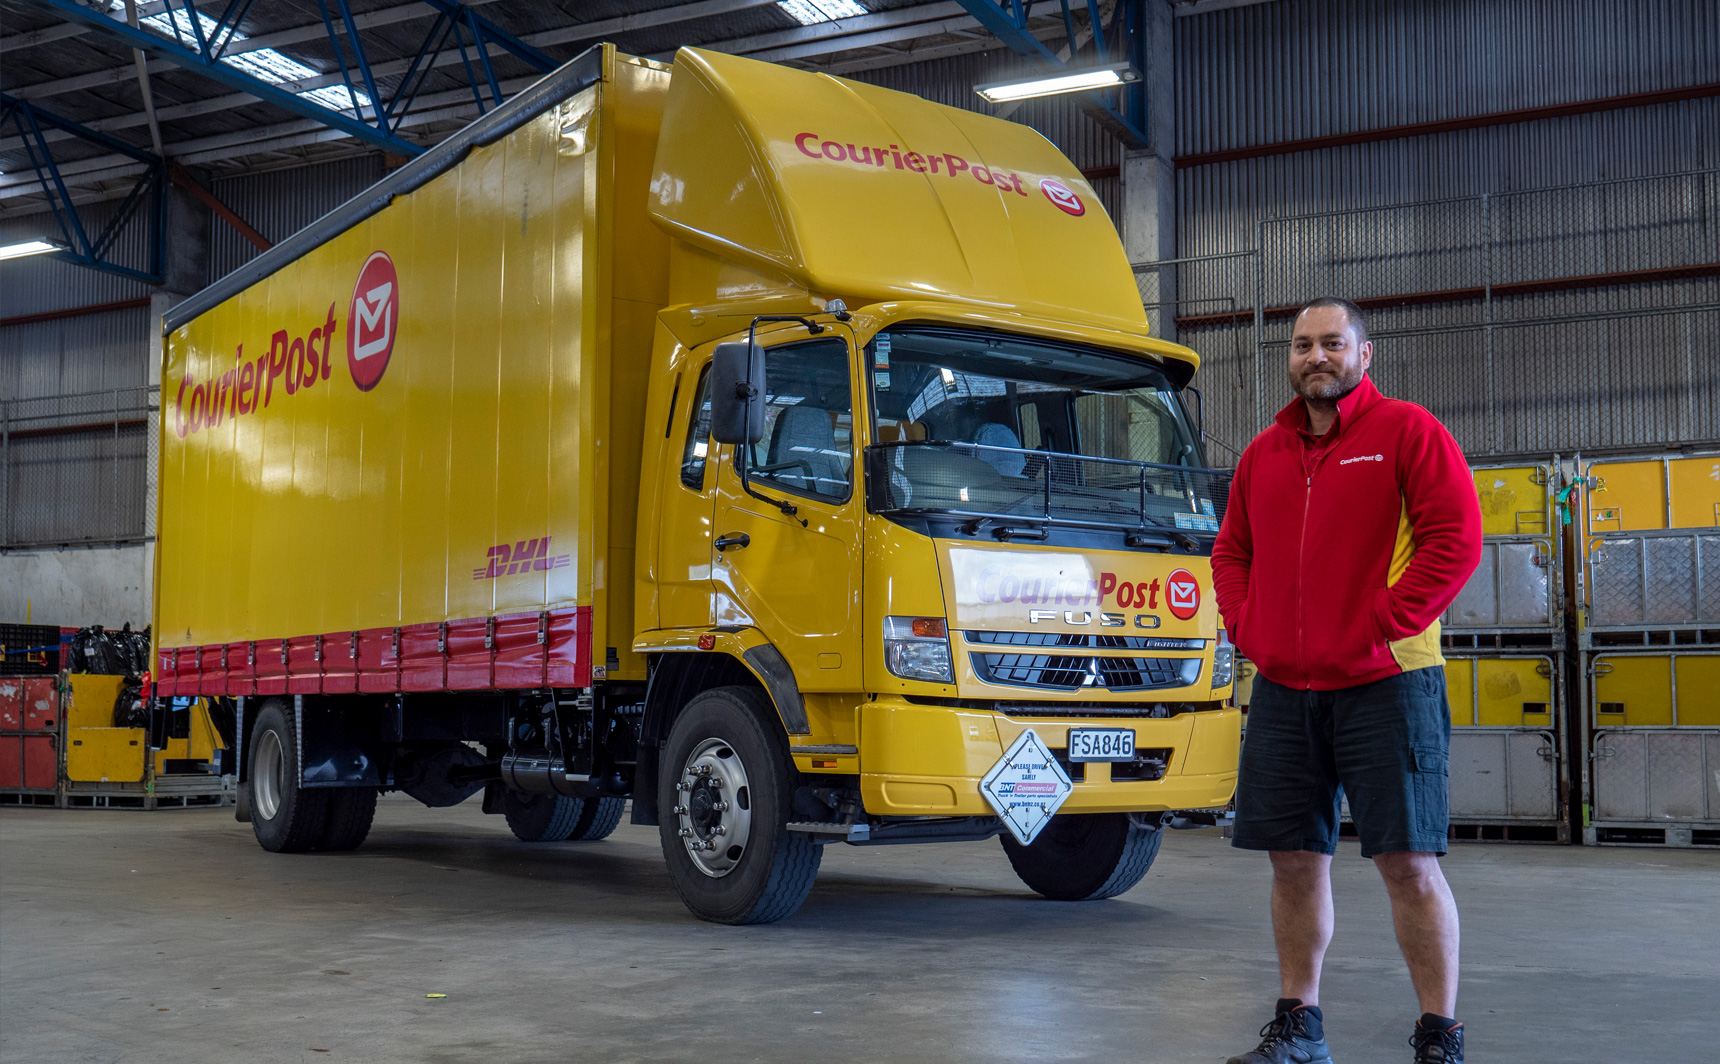 Courier Post and Fuso NZ